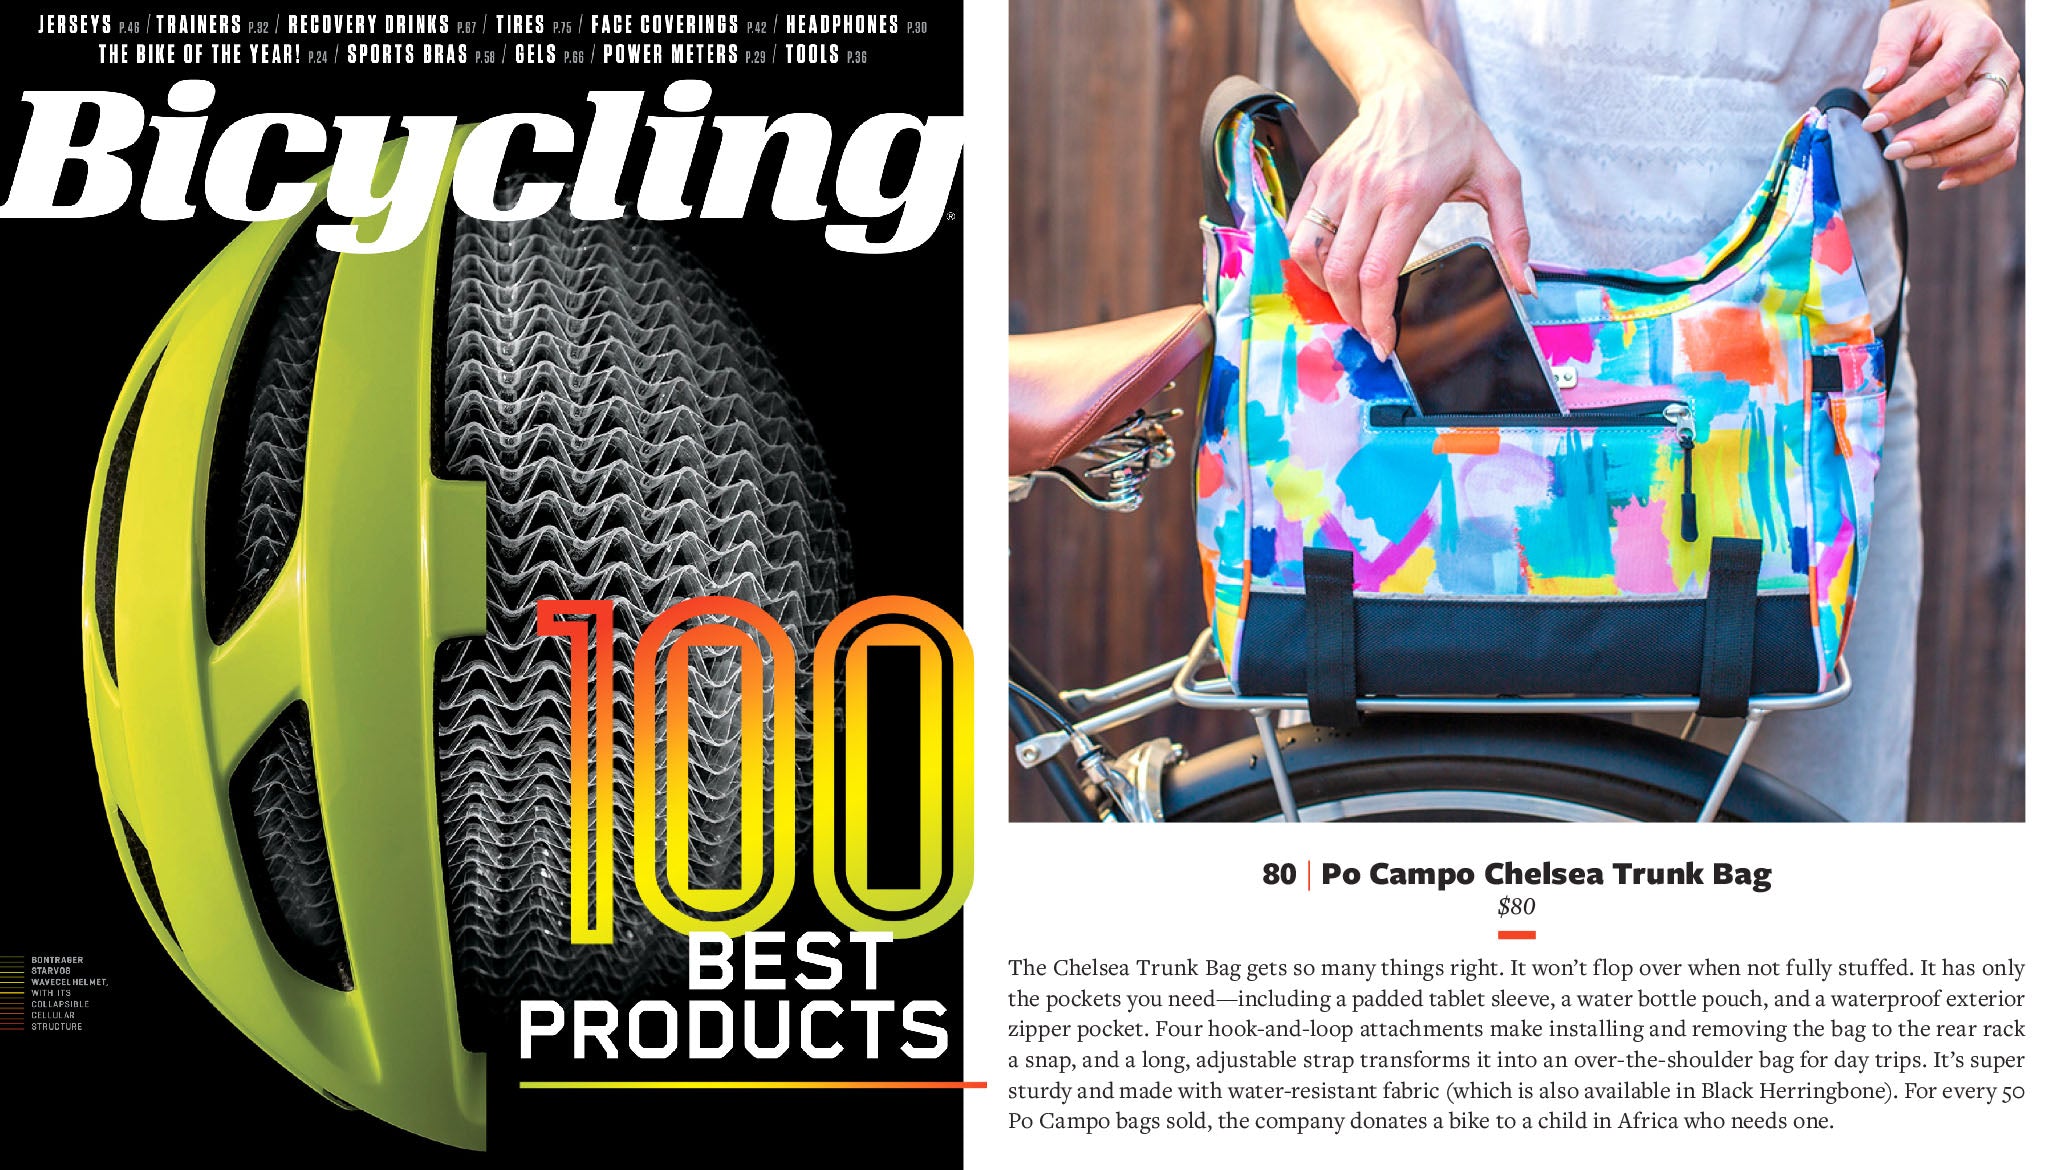 Bicycling Magazine's Top 100 Best Products